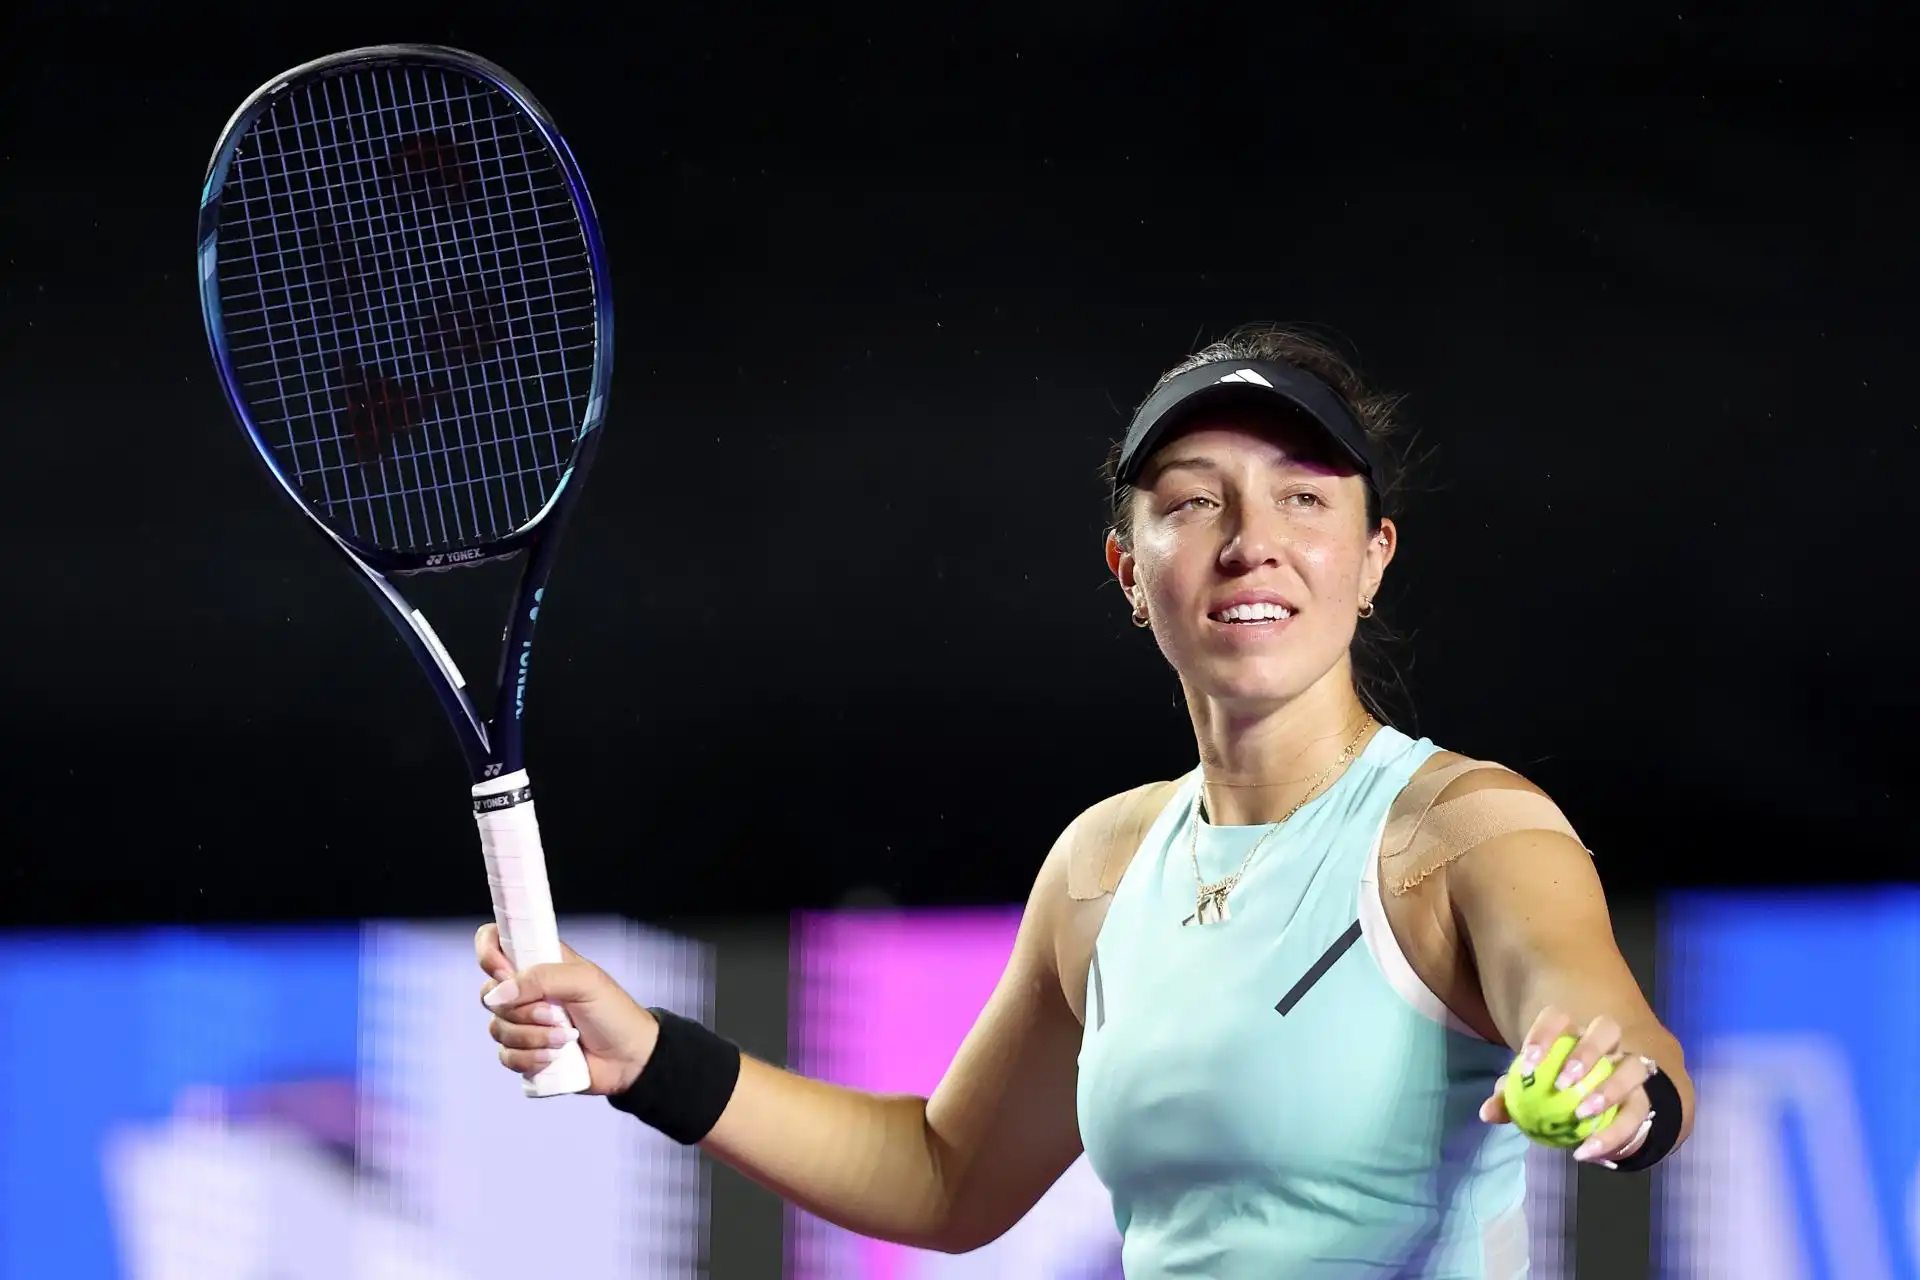 Jessica Pegula shares humorous observation about Iga Swiatek following absence from clay season